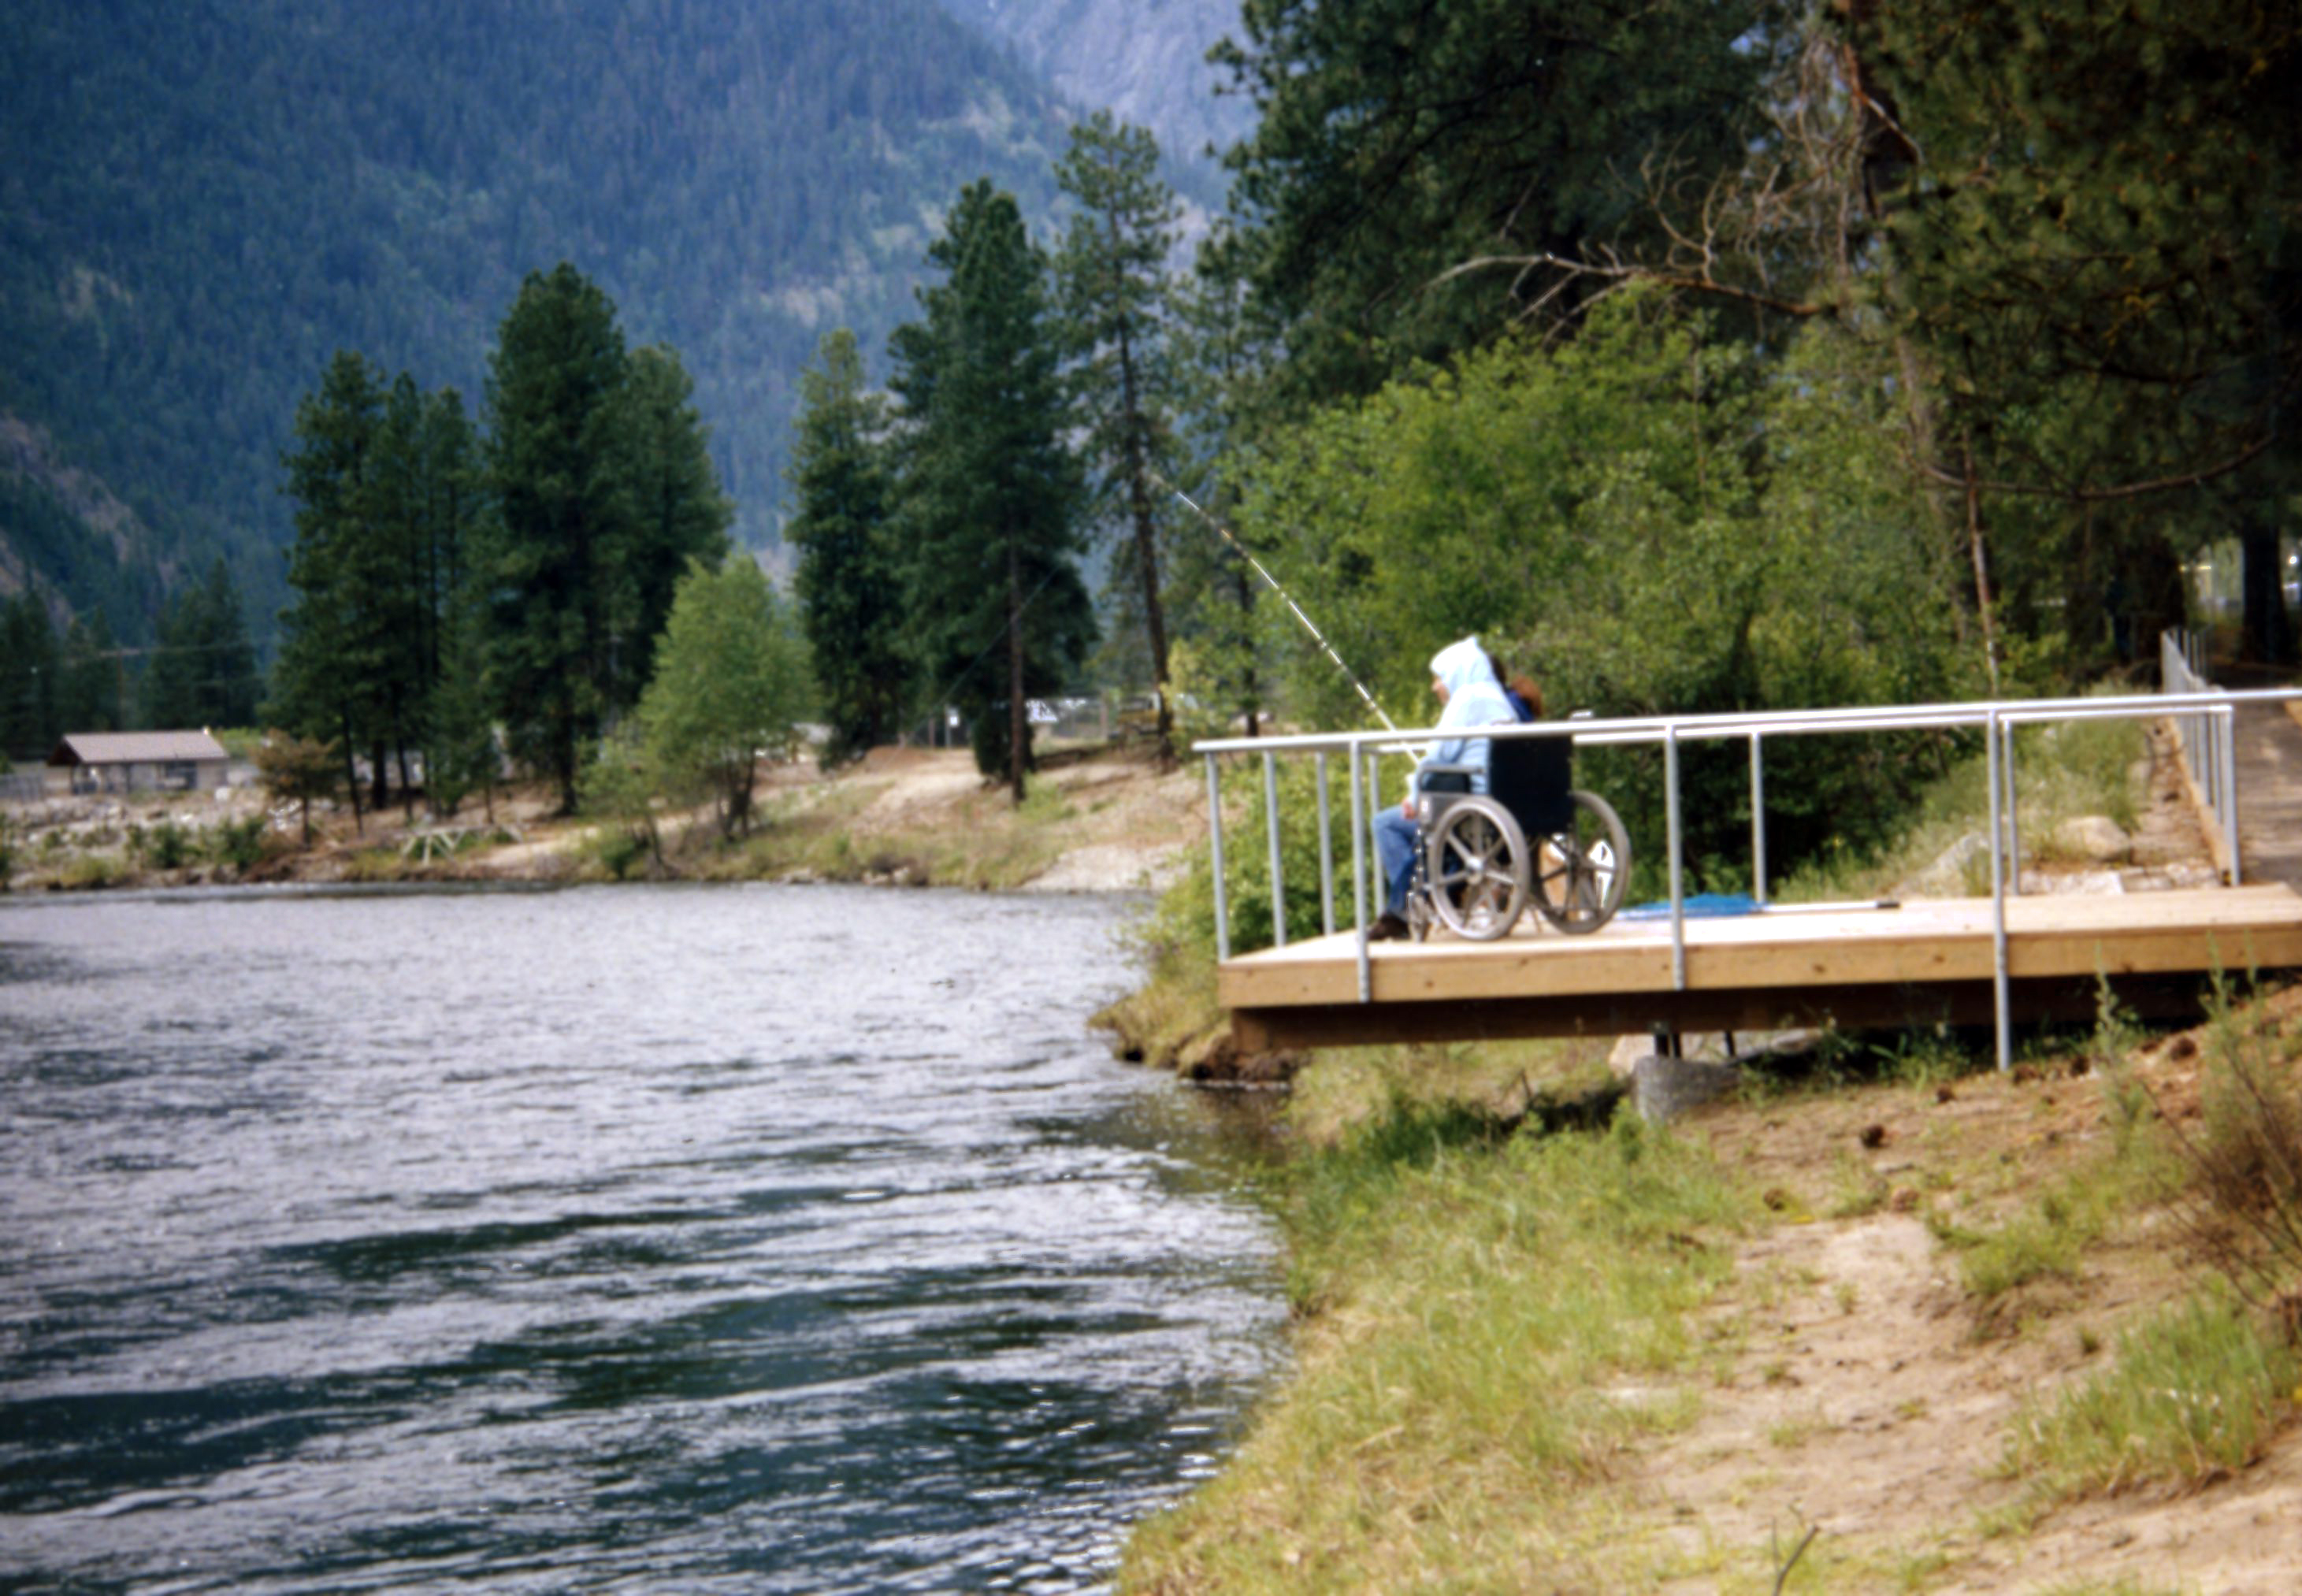 Accessible fishing platform in use